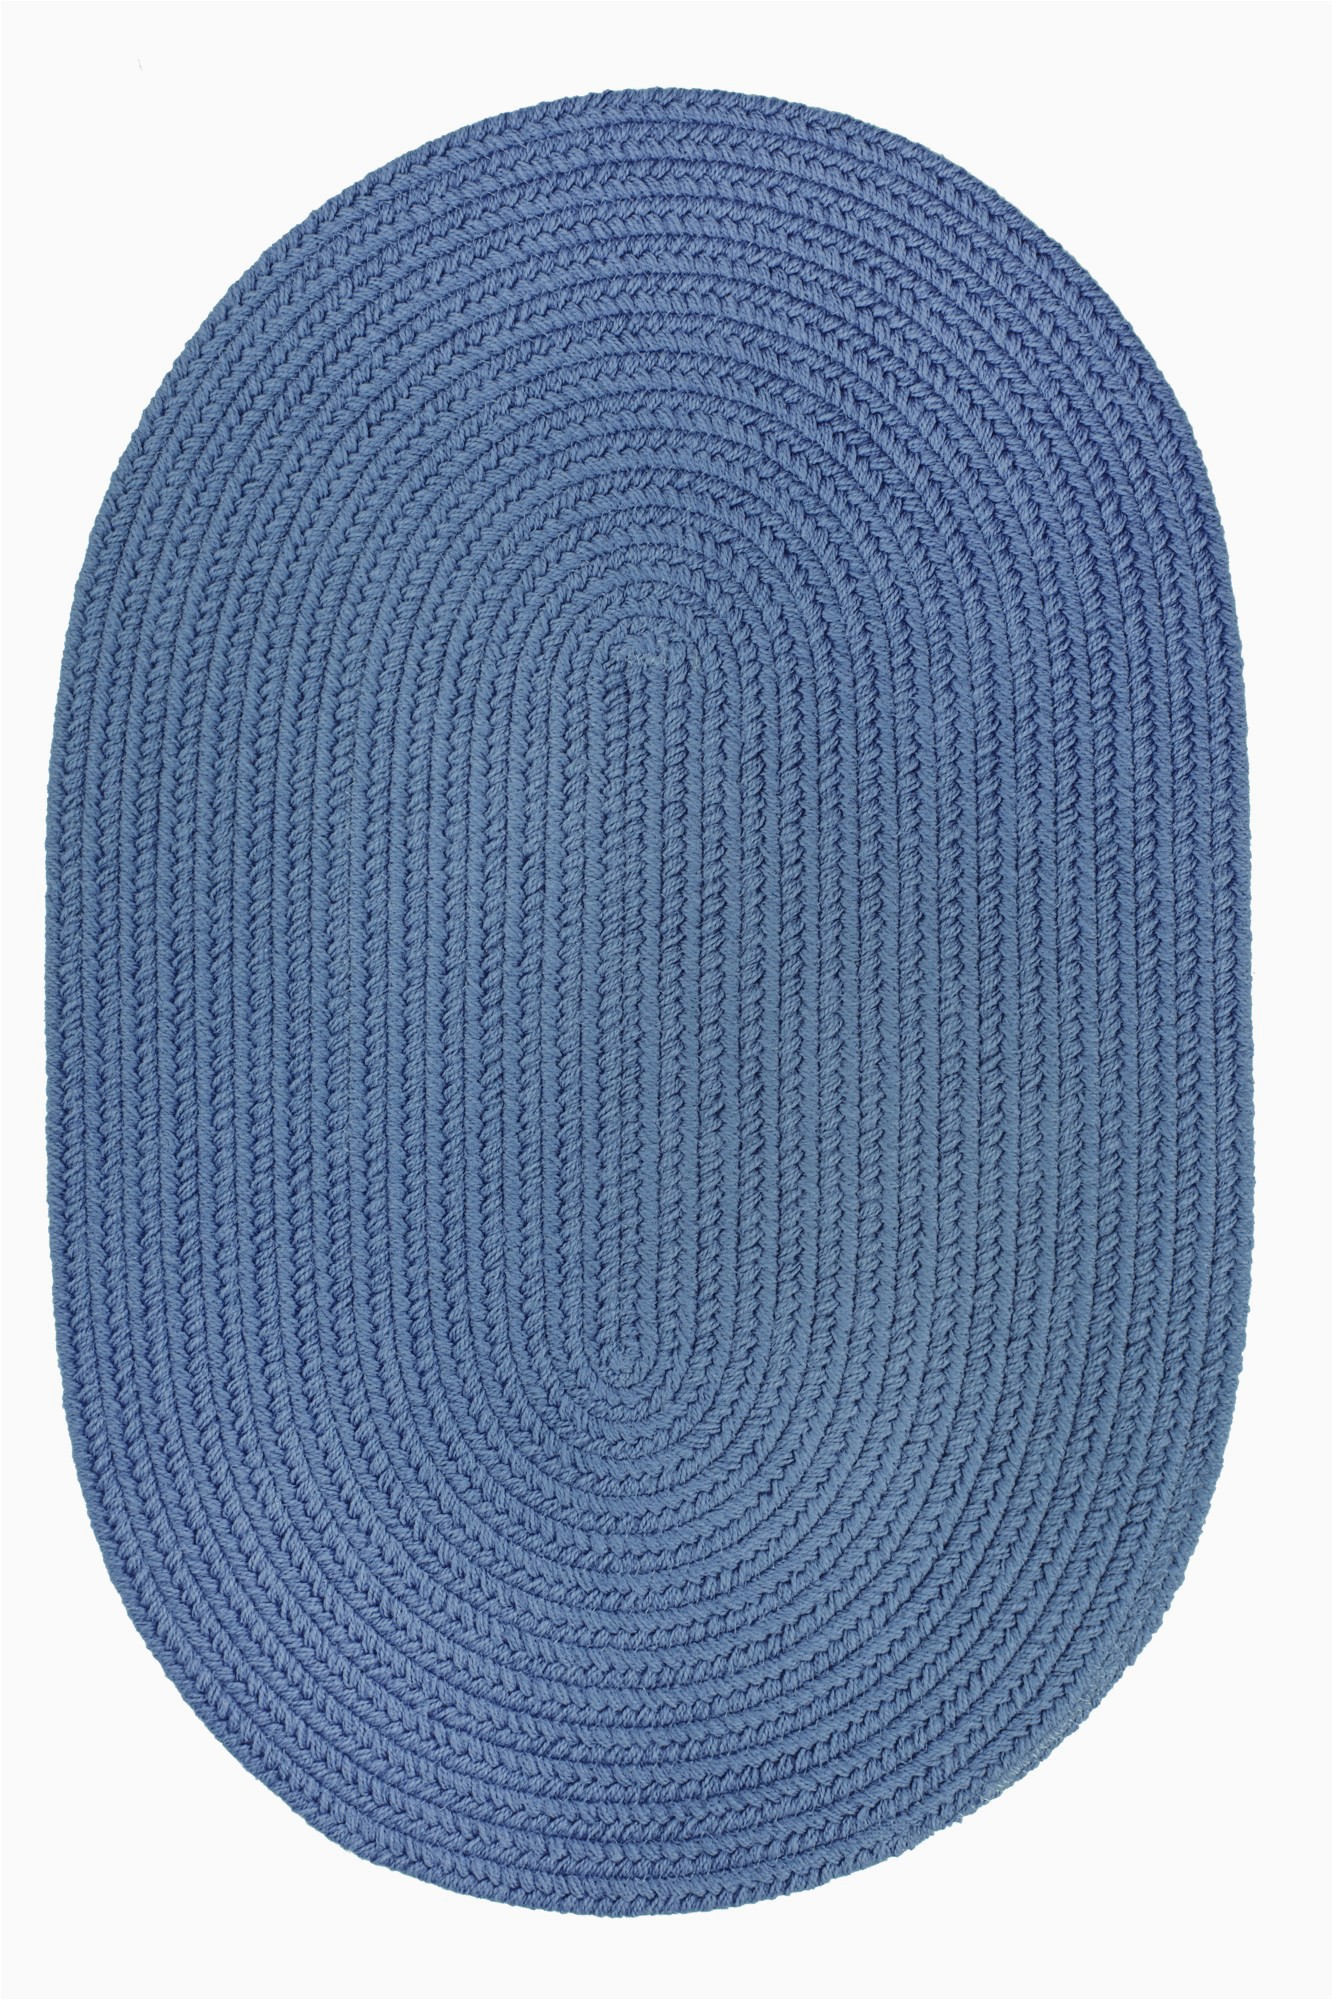 8 Ft Round Rug Blue Indoor Outdoor solid Blue area Rug Braided Textured Design 8ft X 8ft Round Reversible Carpet